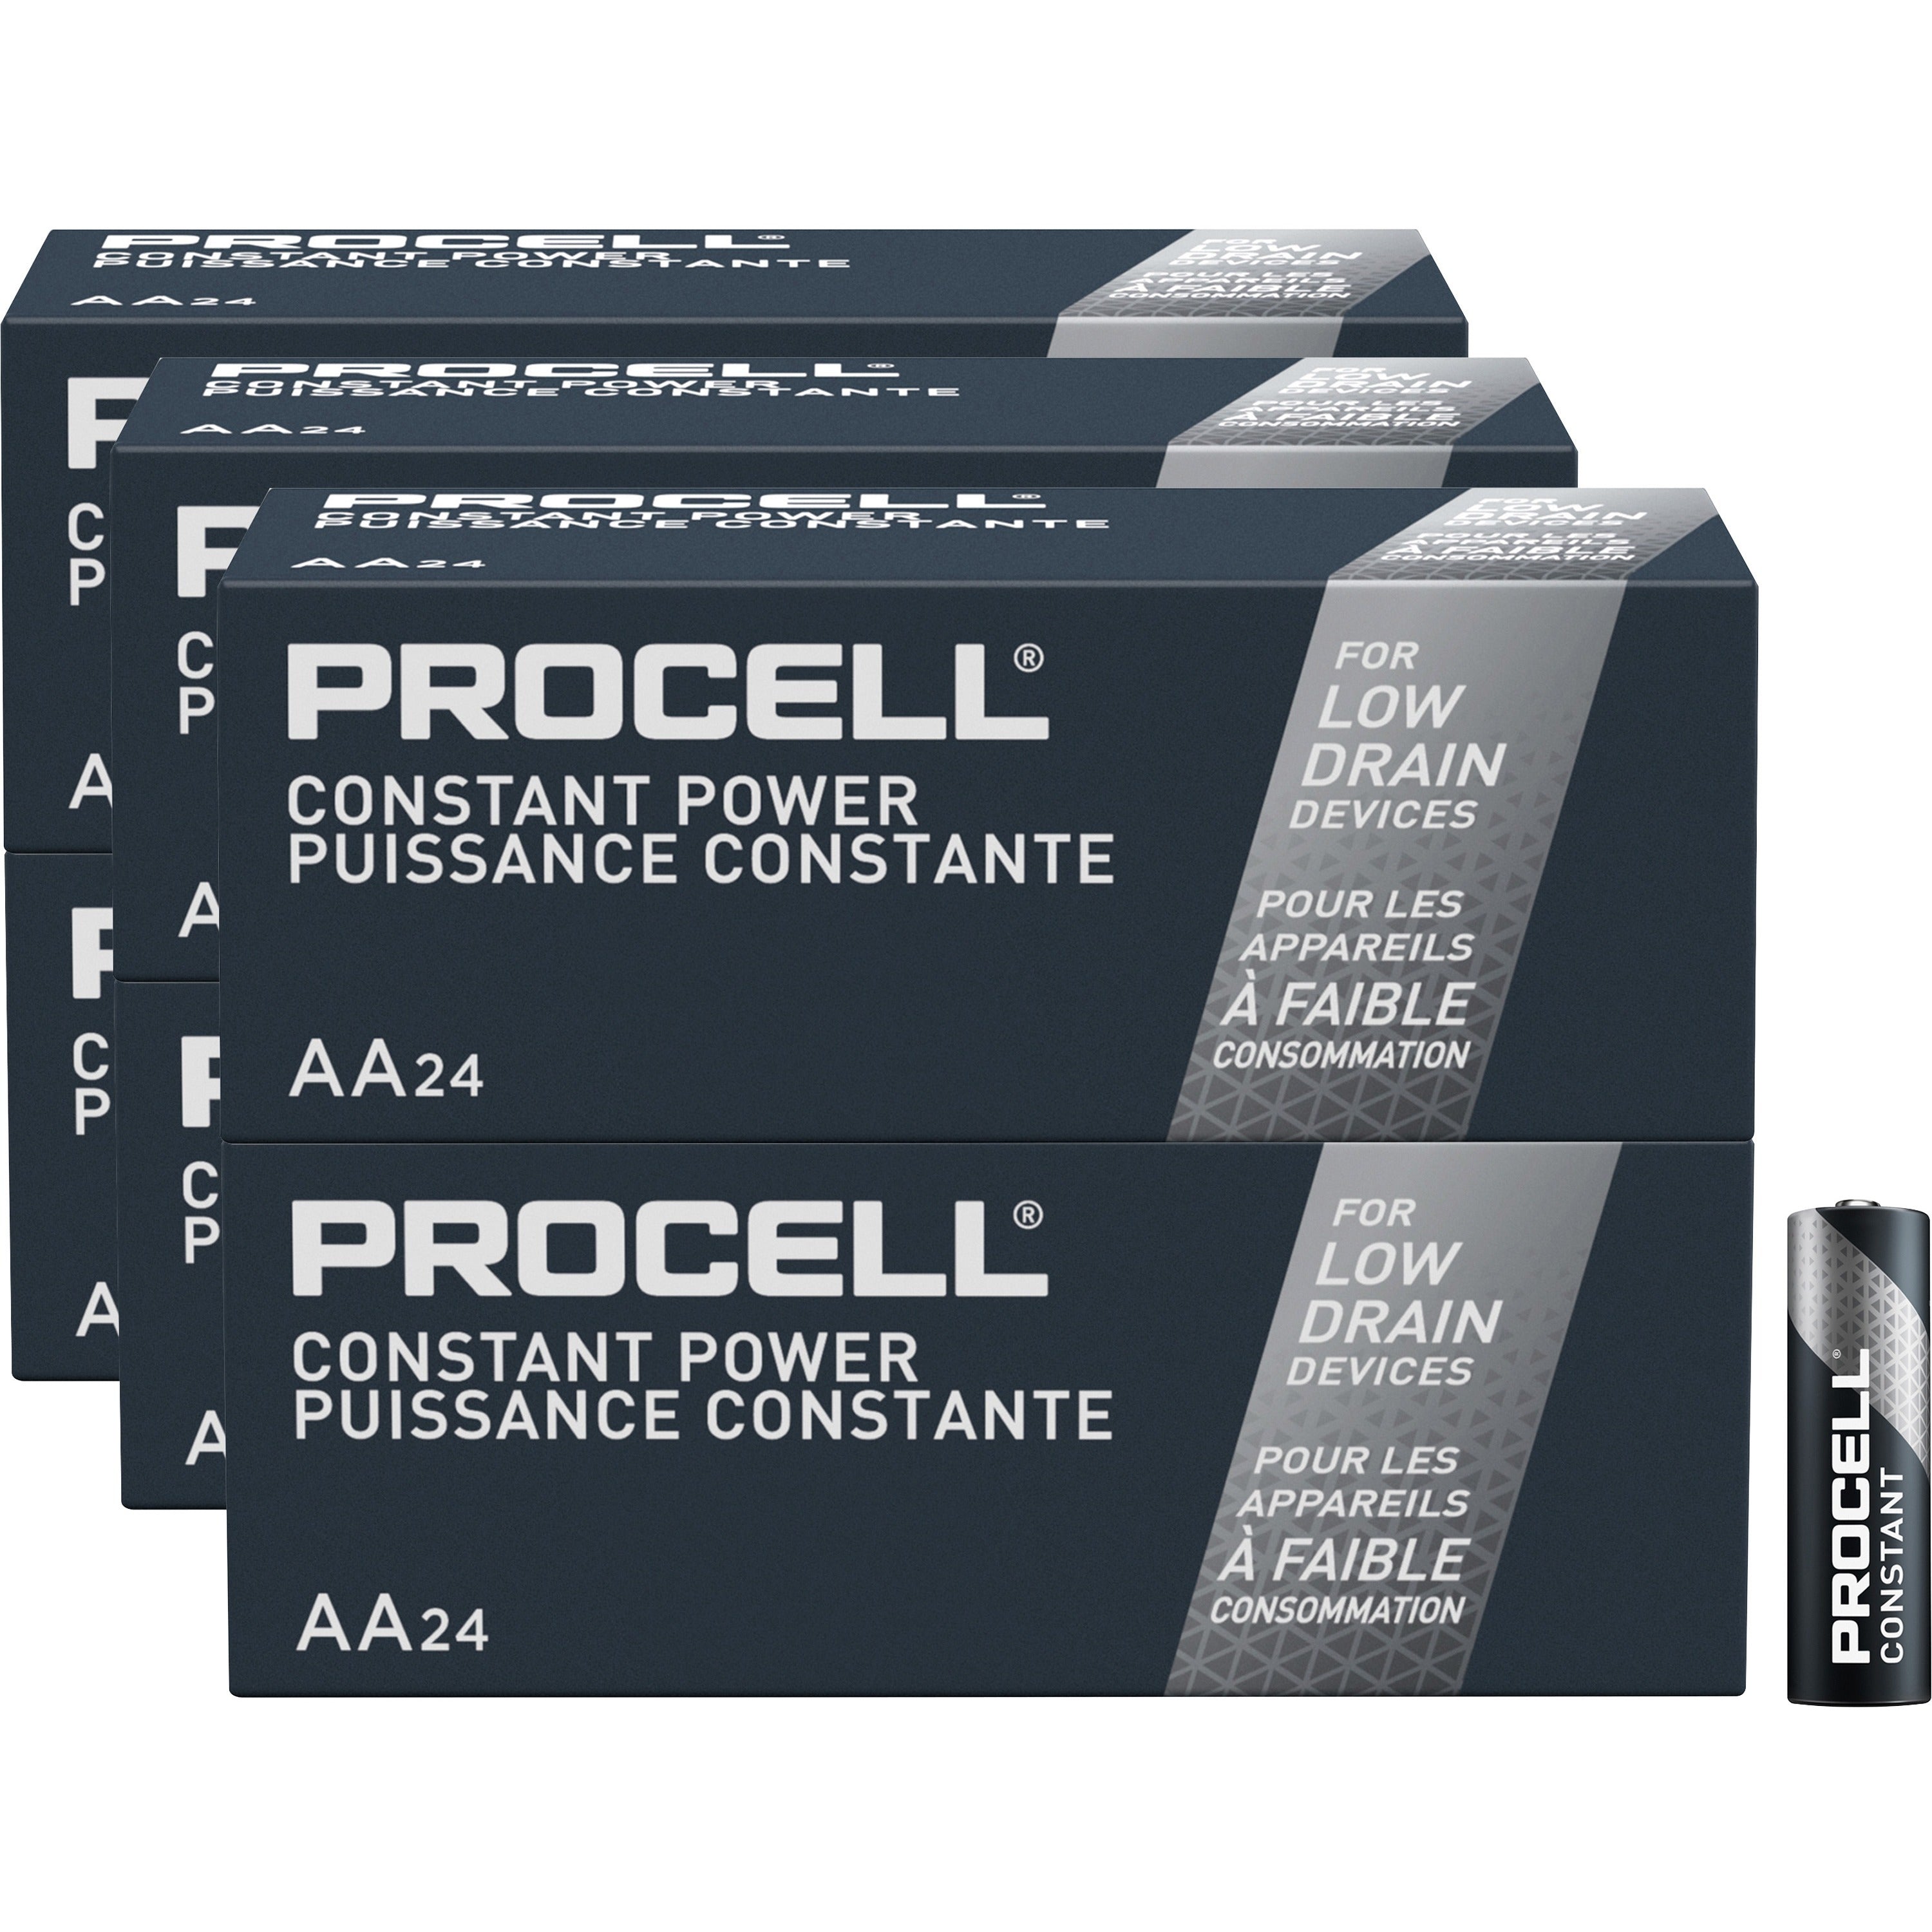 duracell-procell-alkaline-aa-battery-boxes-of-24-for-multipurpose-aa-2100-mah-15-v-dc-144-carton_durpc1500bkdct - 1